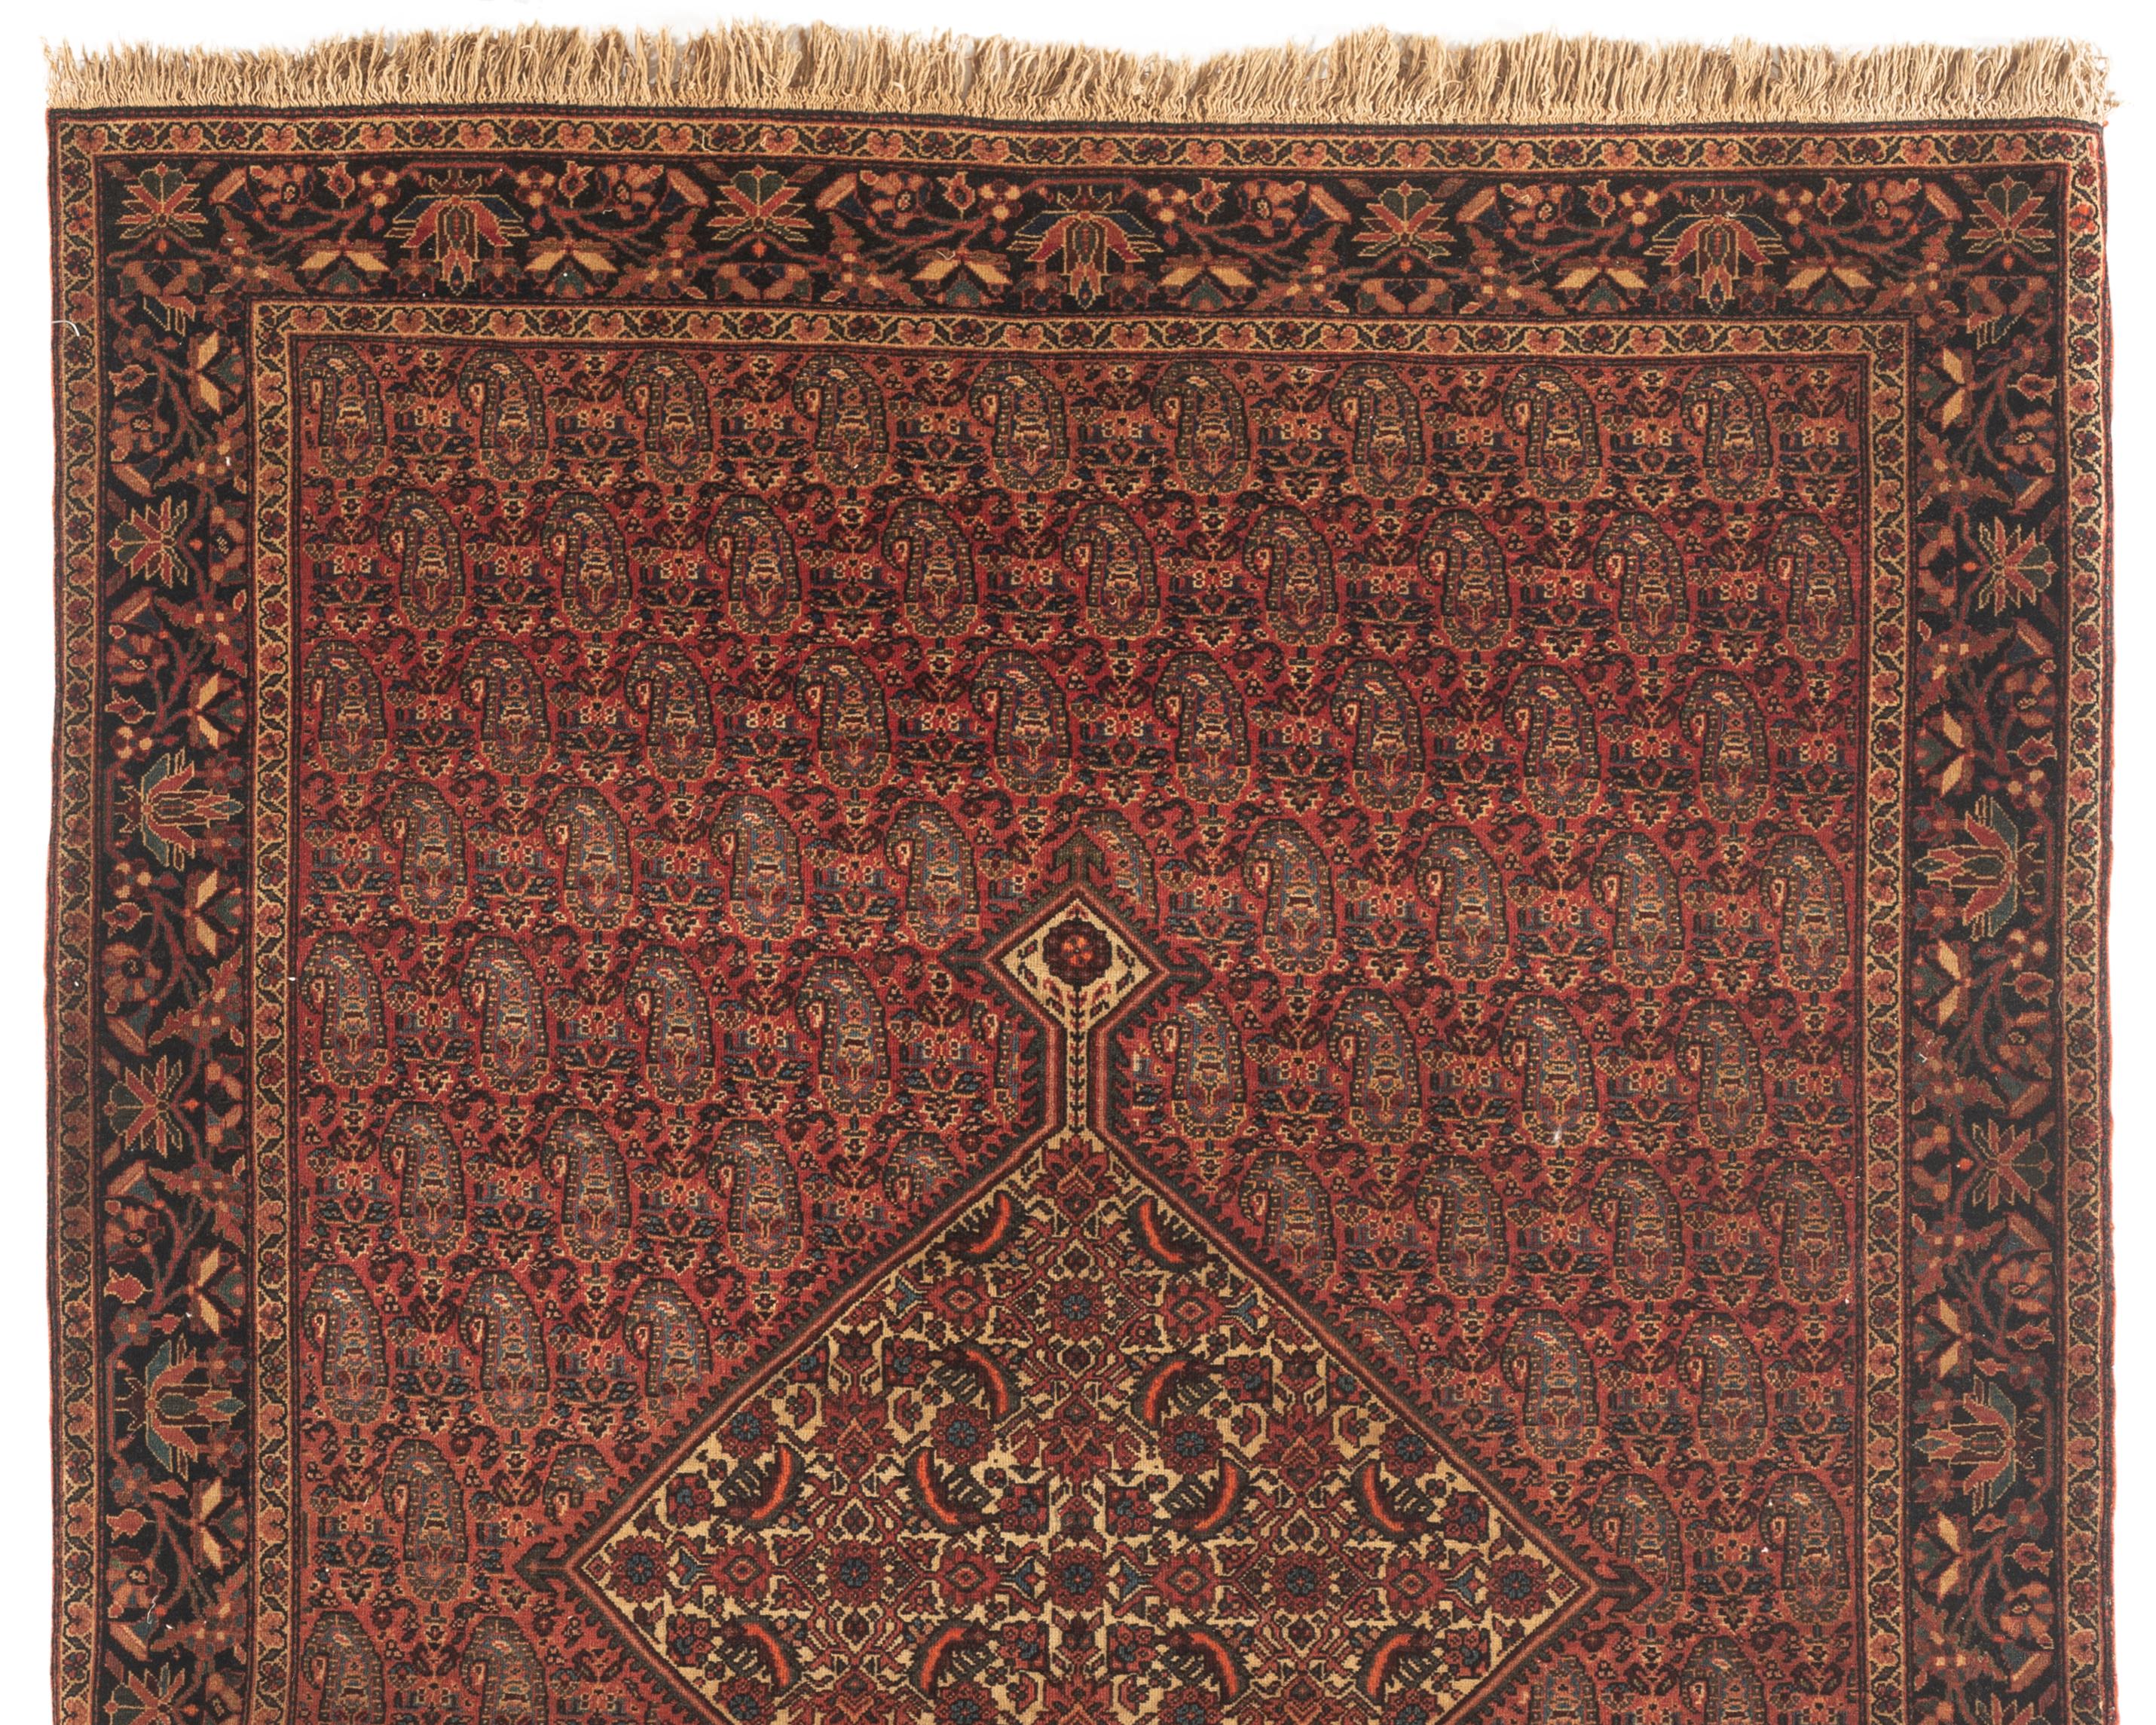 Antique Farahan Sarouk rug circa 1890. Sarouk rugs come from west central Persia. A wonderful detailed design on this rug, the central rust field full of boteh's surrounding and ivory ground enclosed by a navy border with floral designs. Size: 4'2 x